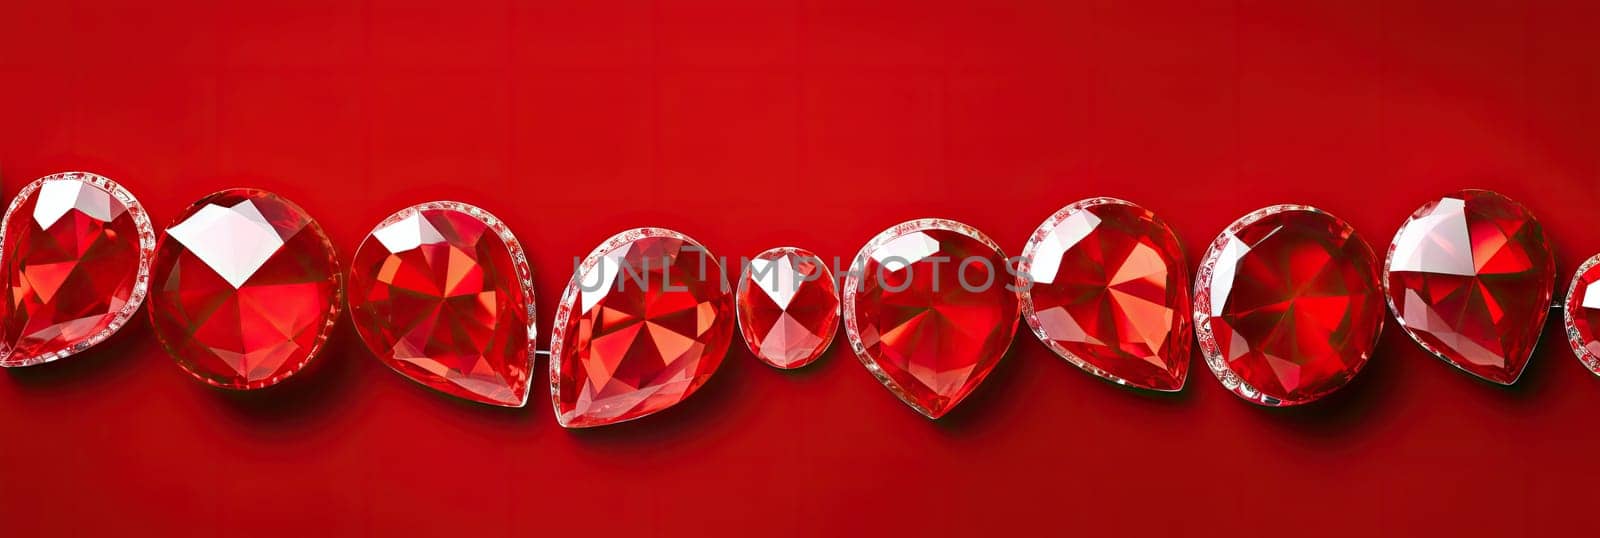 Exquisite red hearts made of precious stones on a red background symbolize passion and love, decorating the holiday of all lovers with a unique brilliance.